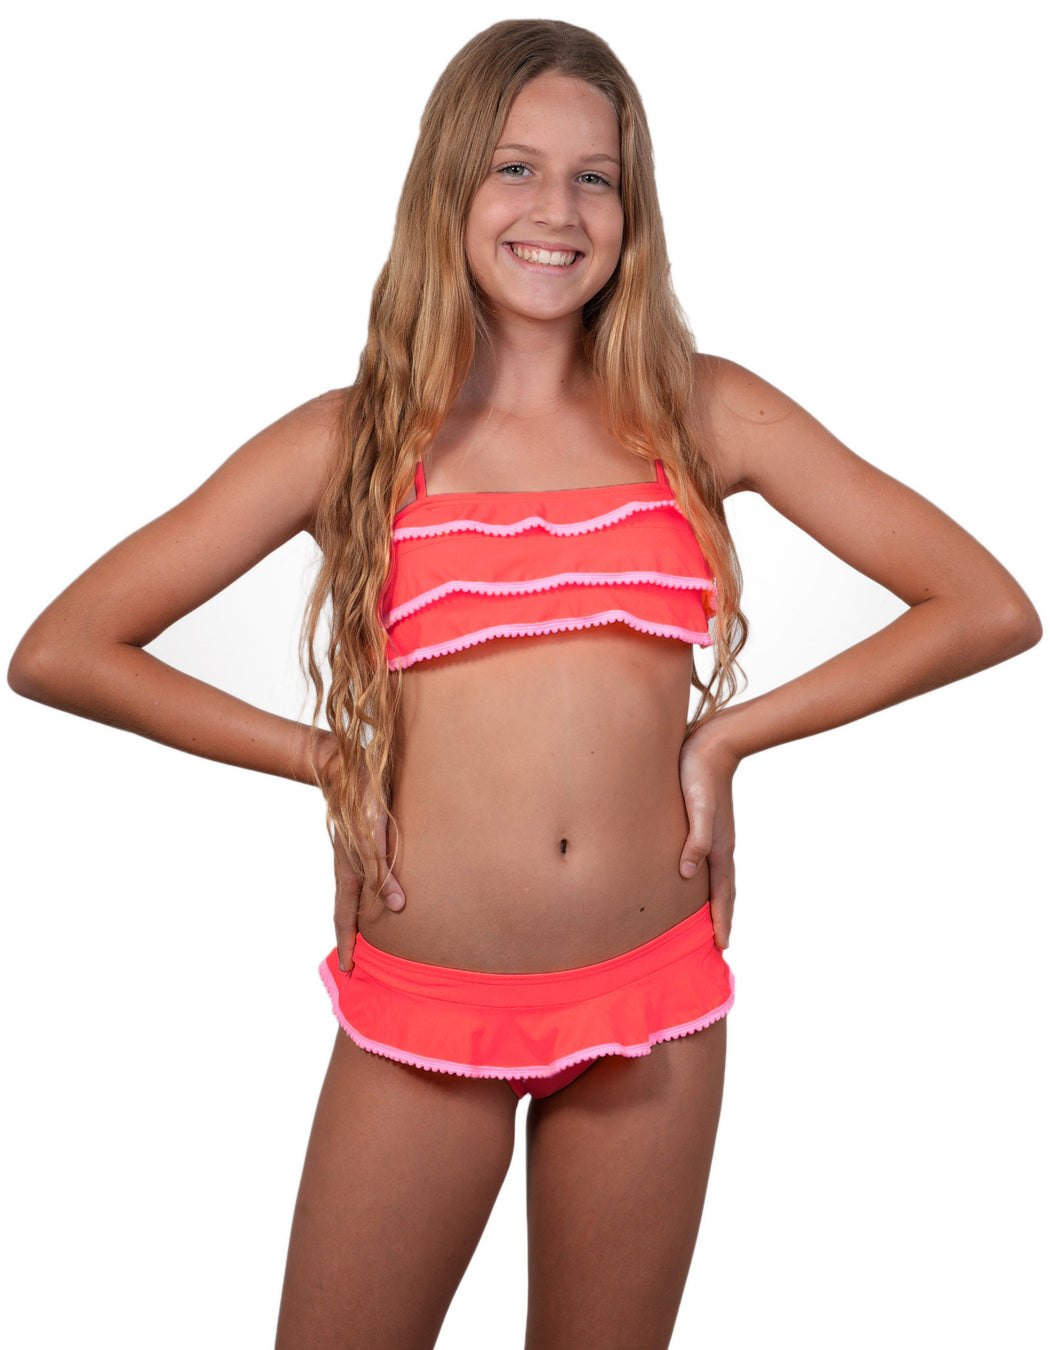 Finch Girls bikini with bandeau top and frill skirted bottoms in Fiesta colour